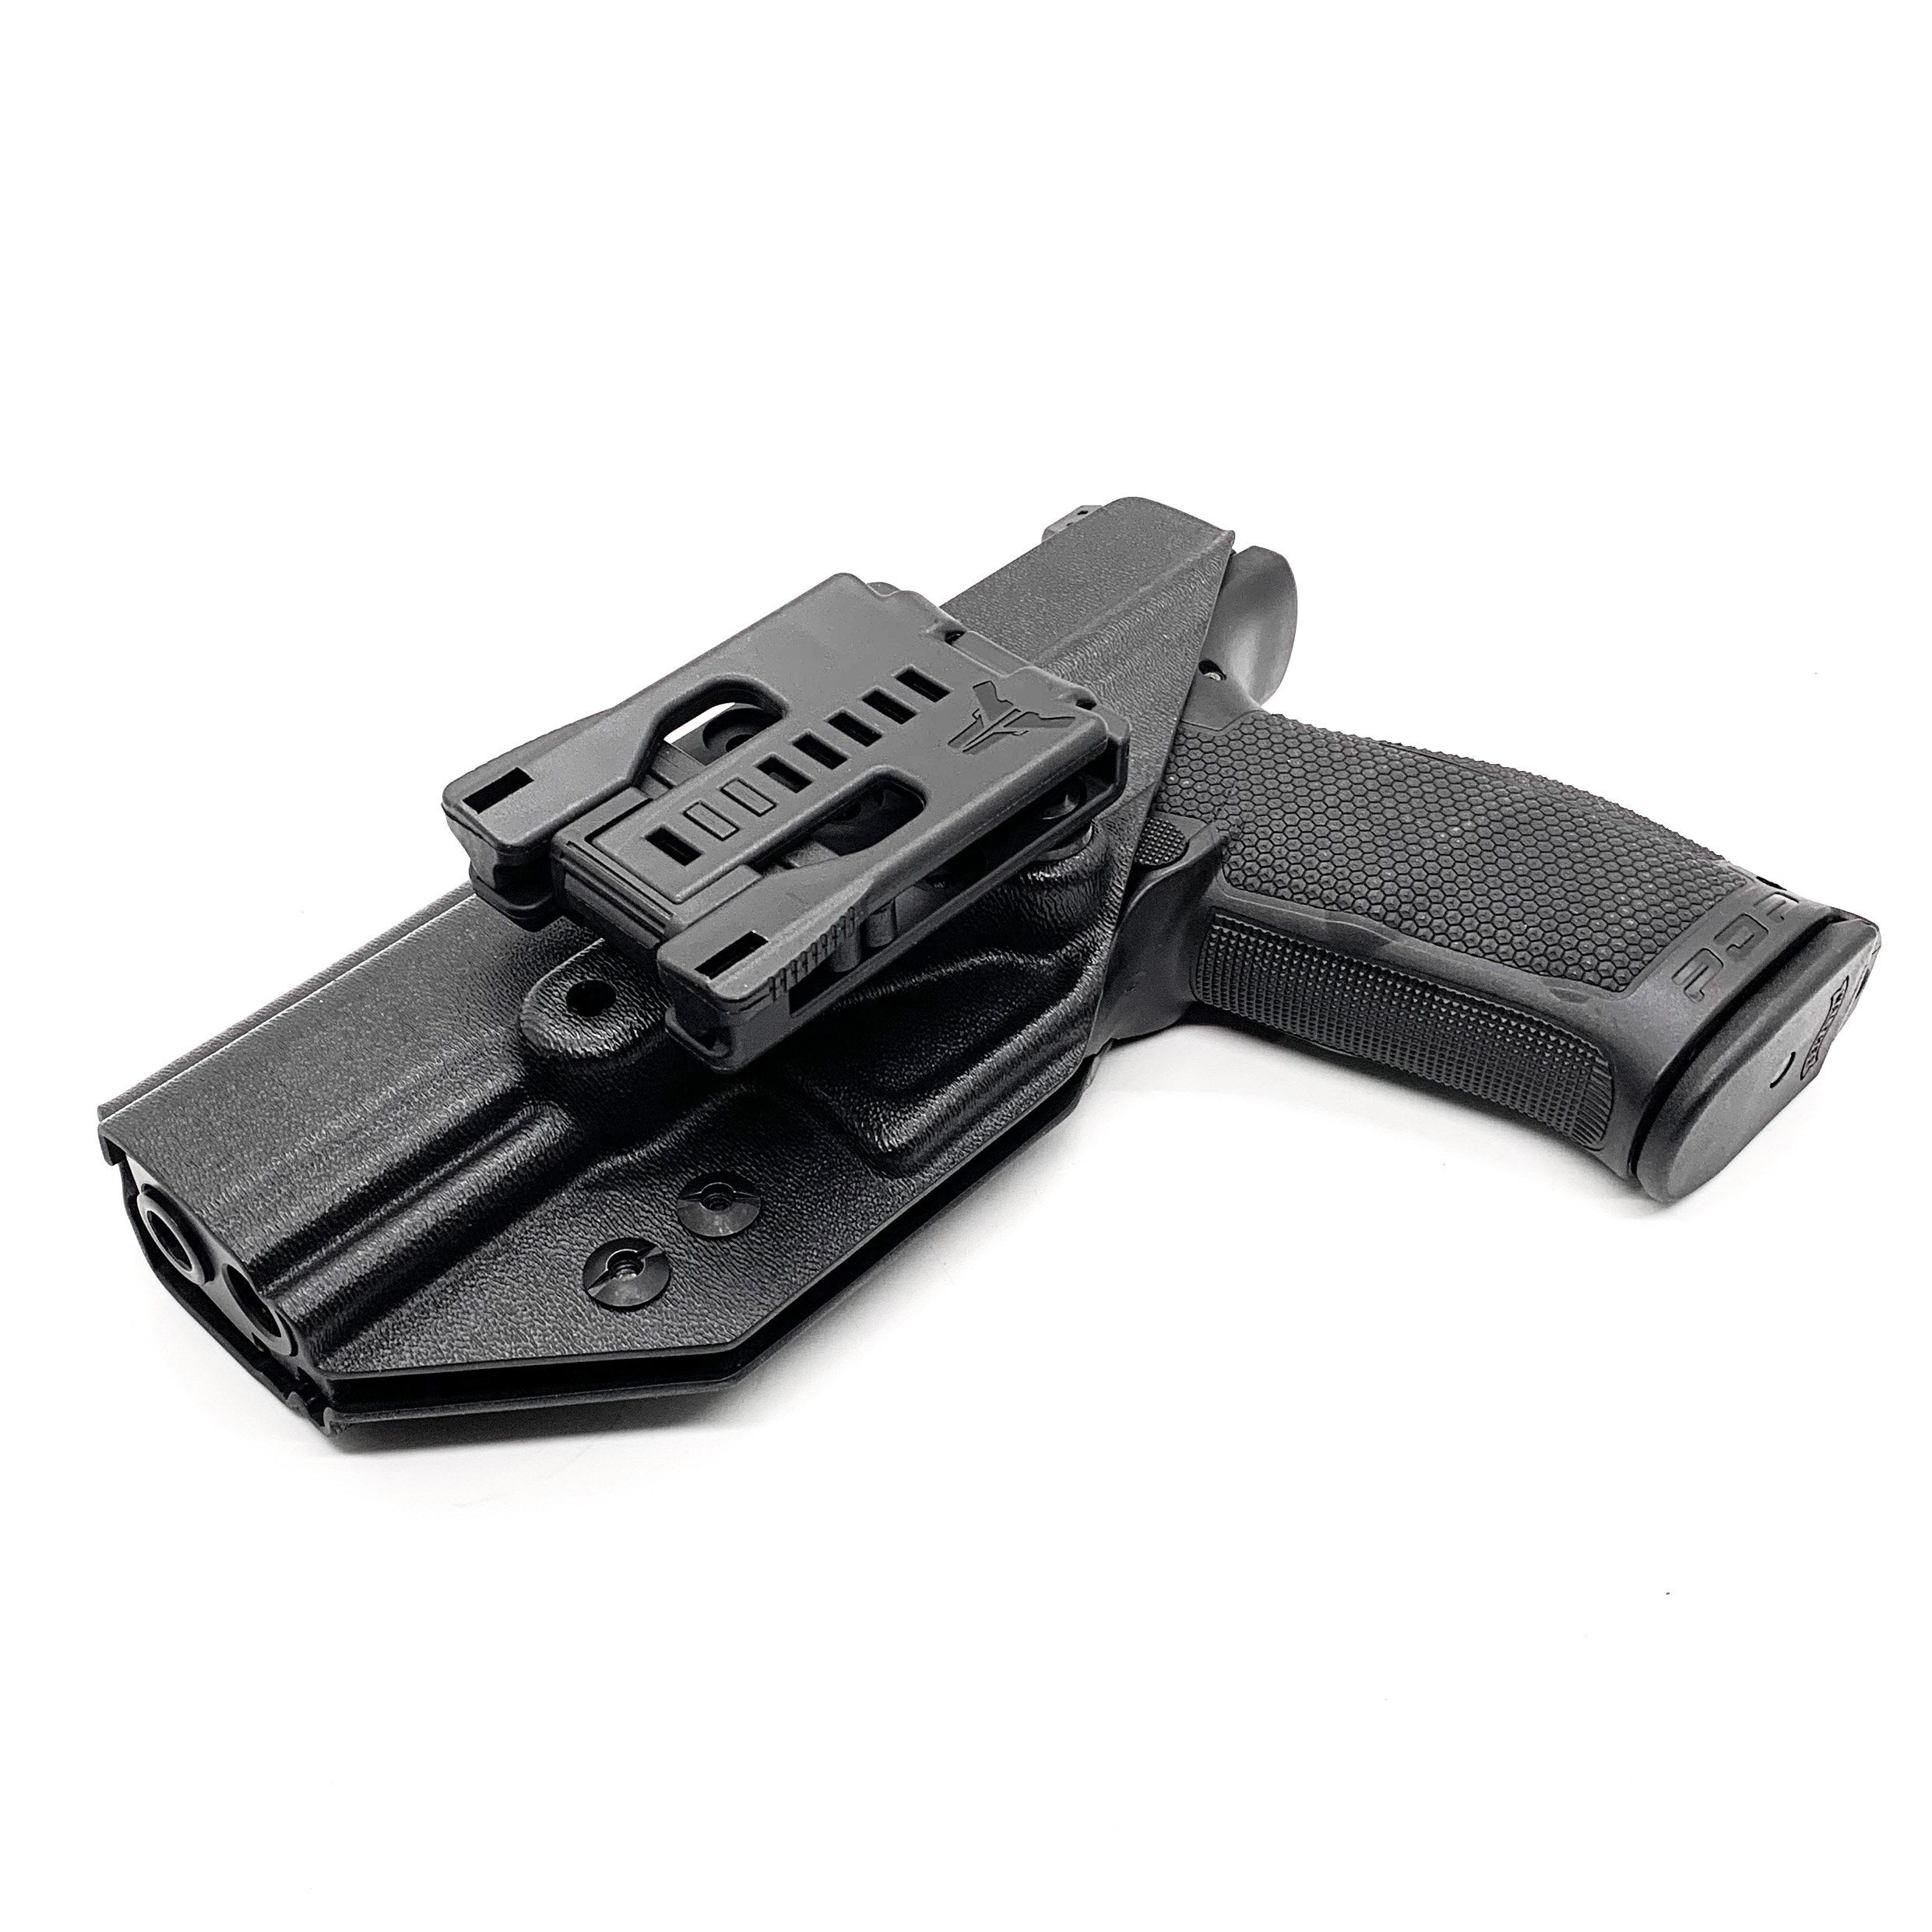 For the best, Outside Waistband OWB Kydex Holster designed to fit the Walther PDP 4 " full size or compact handgun, shop Four Brothers Holsters.  Full sweat guard, adjustable retention. Made in USA from .080" black thermoplastic for durability. Open muzzle for threaded barrels, cleared for red dot sights. 